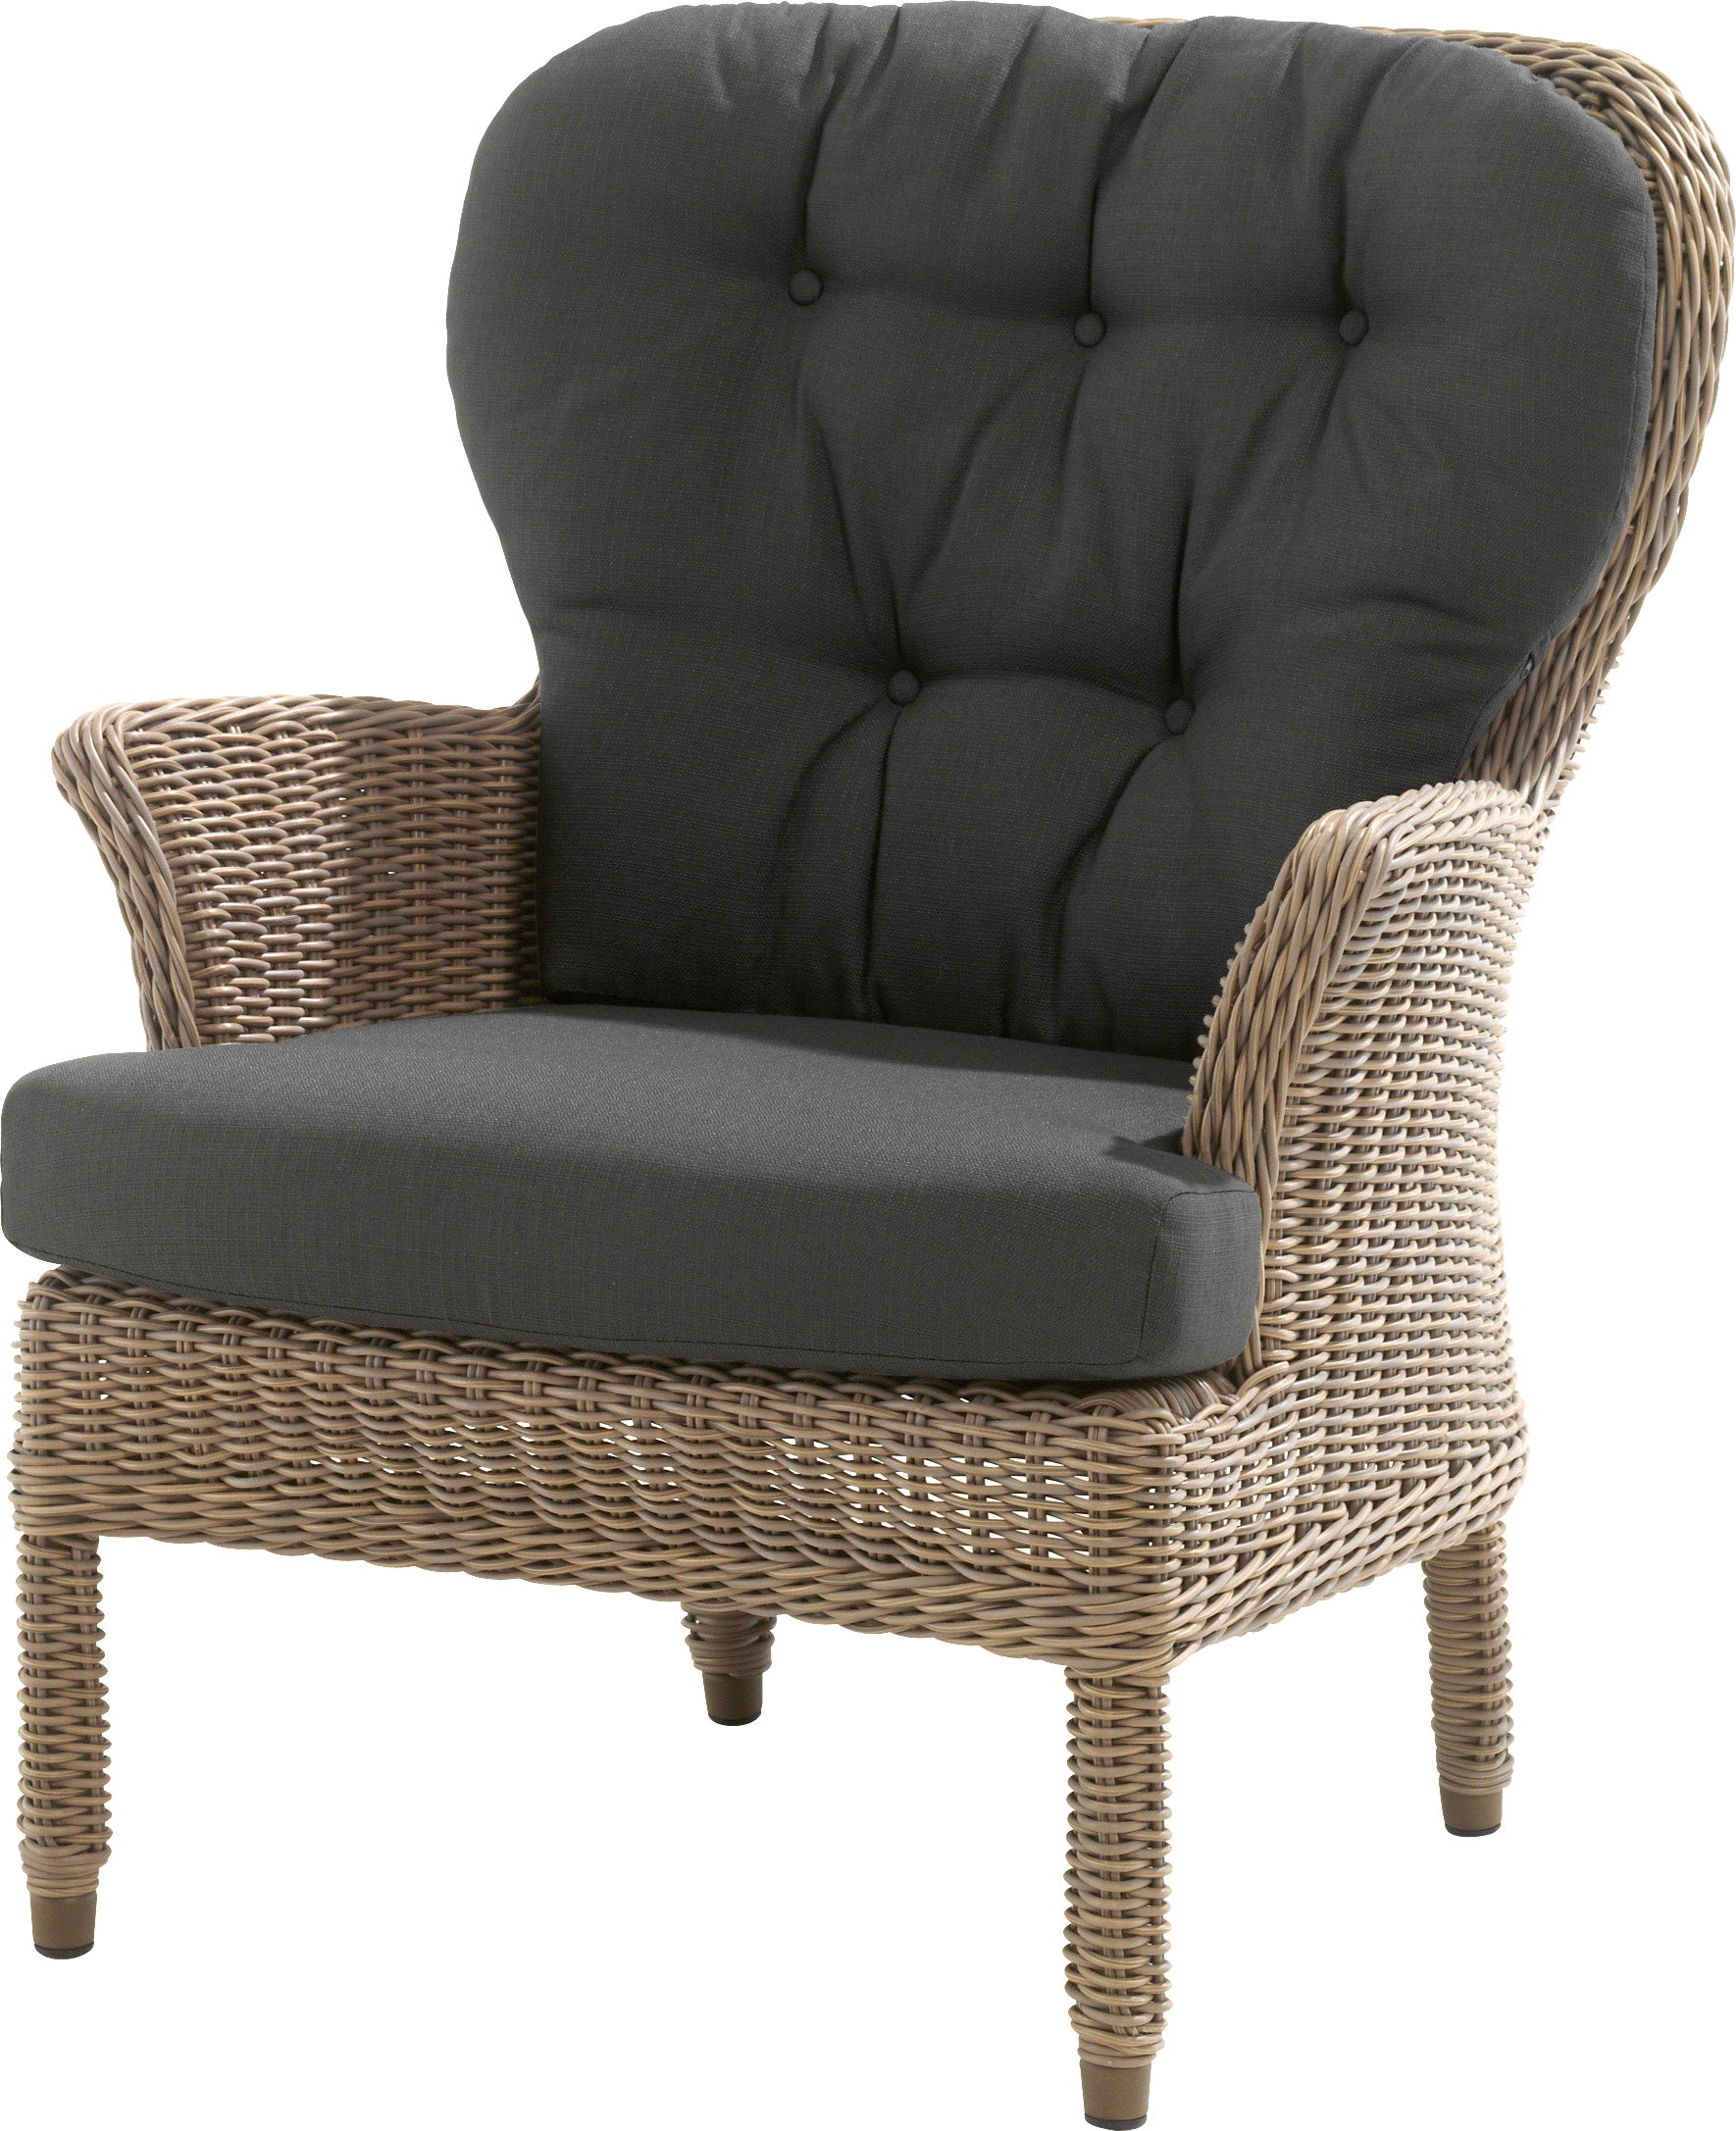 4 Seasons Outdoor Buckingham Dining Chair With 2 Cushions